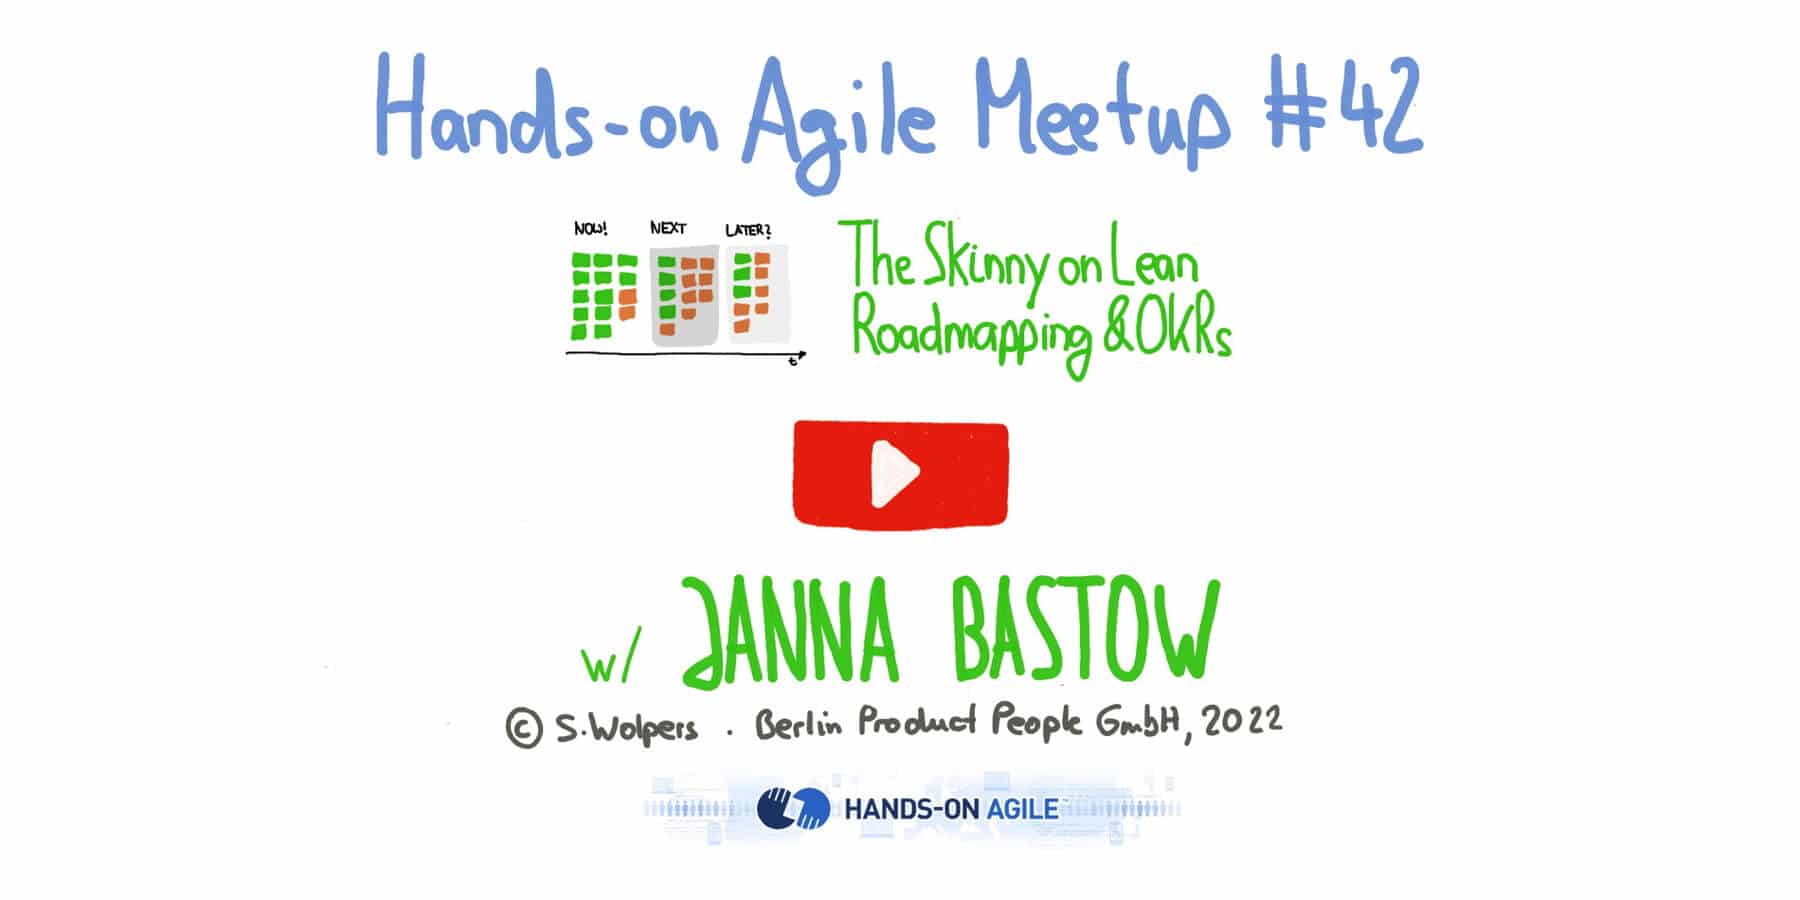 Janna Bastow: Lean Roadmapping and OKRs — Hands-on Agile #42 — Berlin Product People GmbH